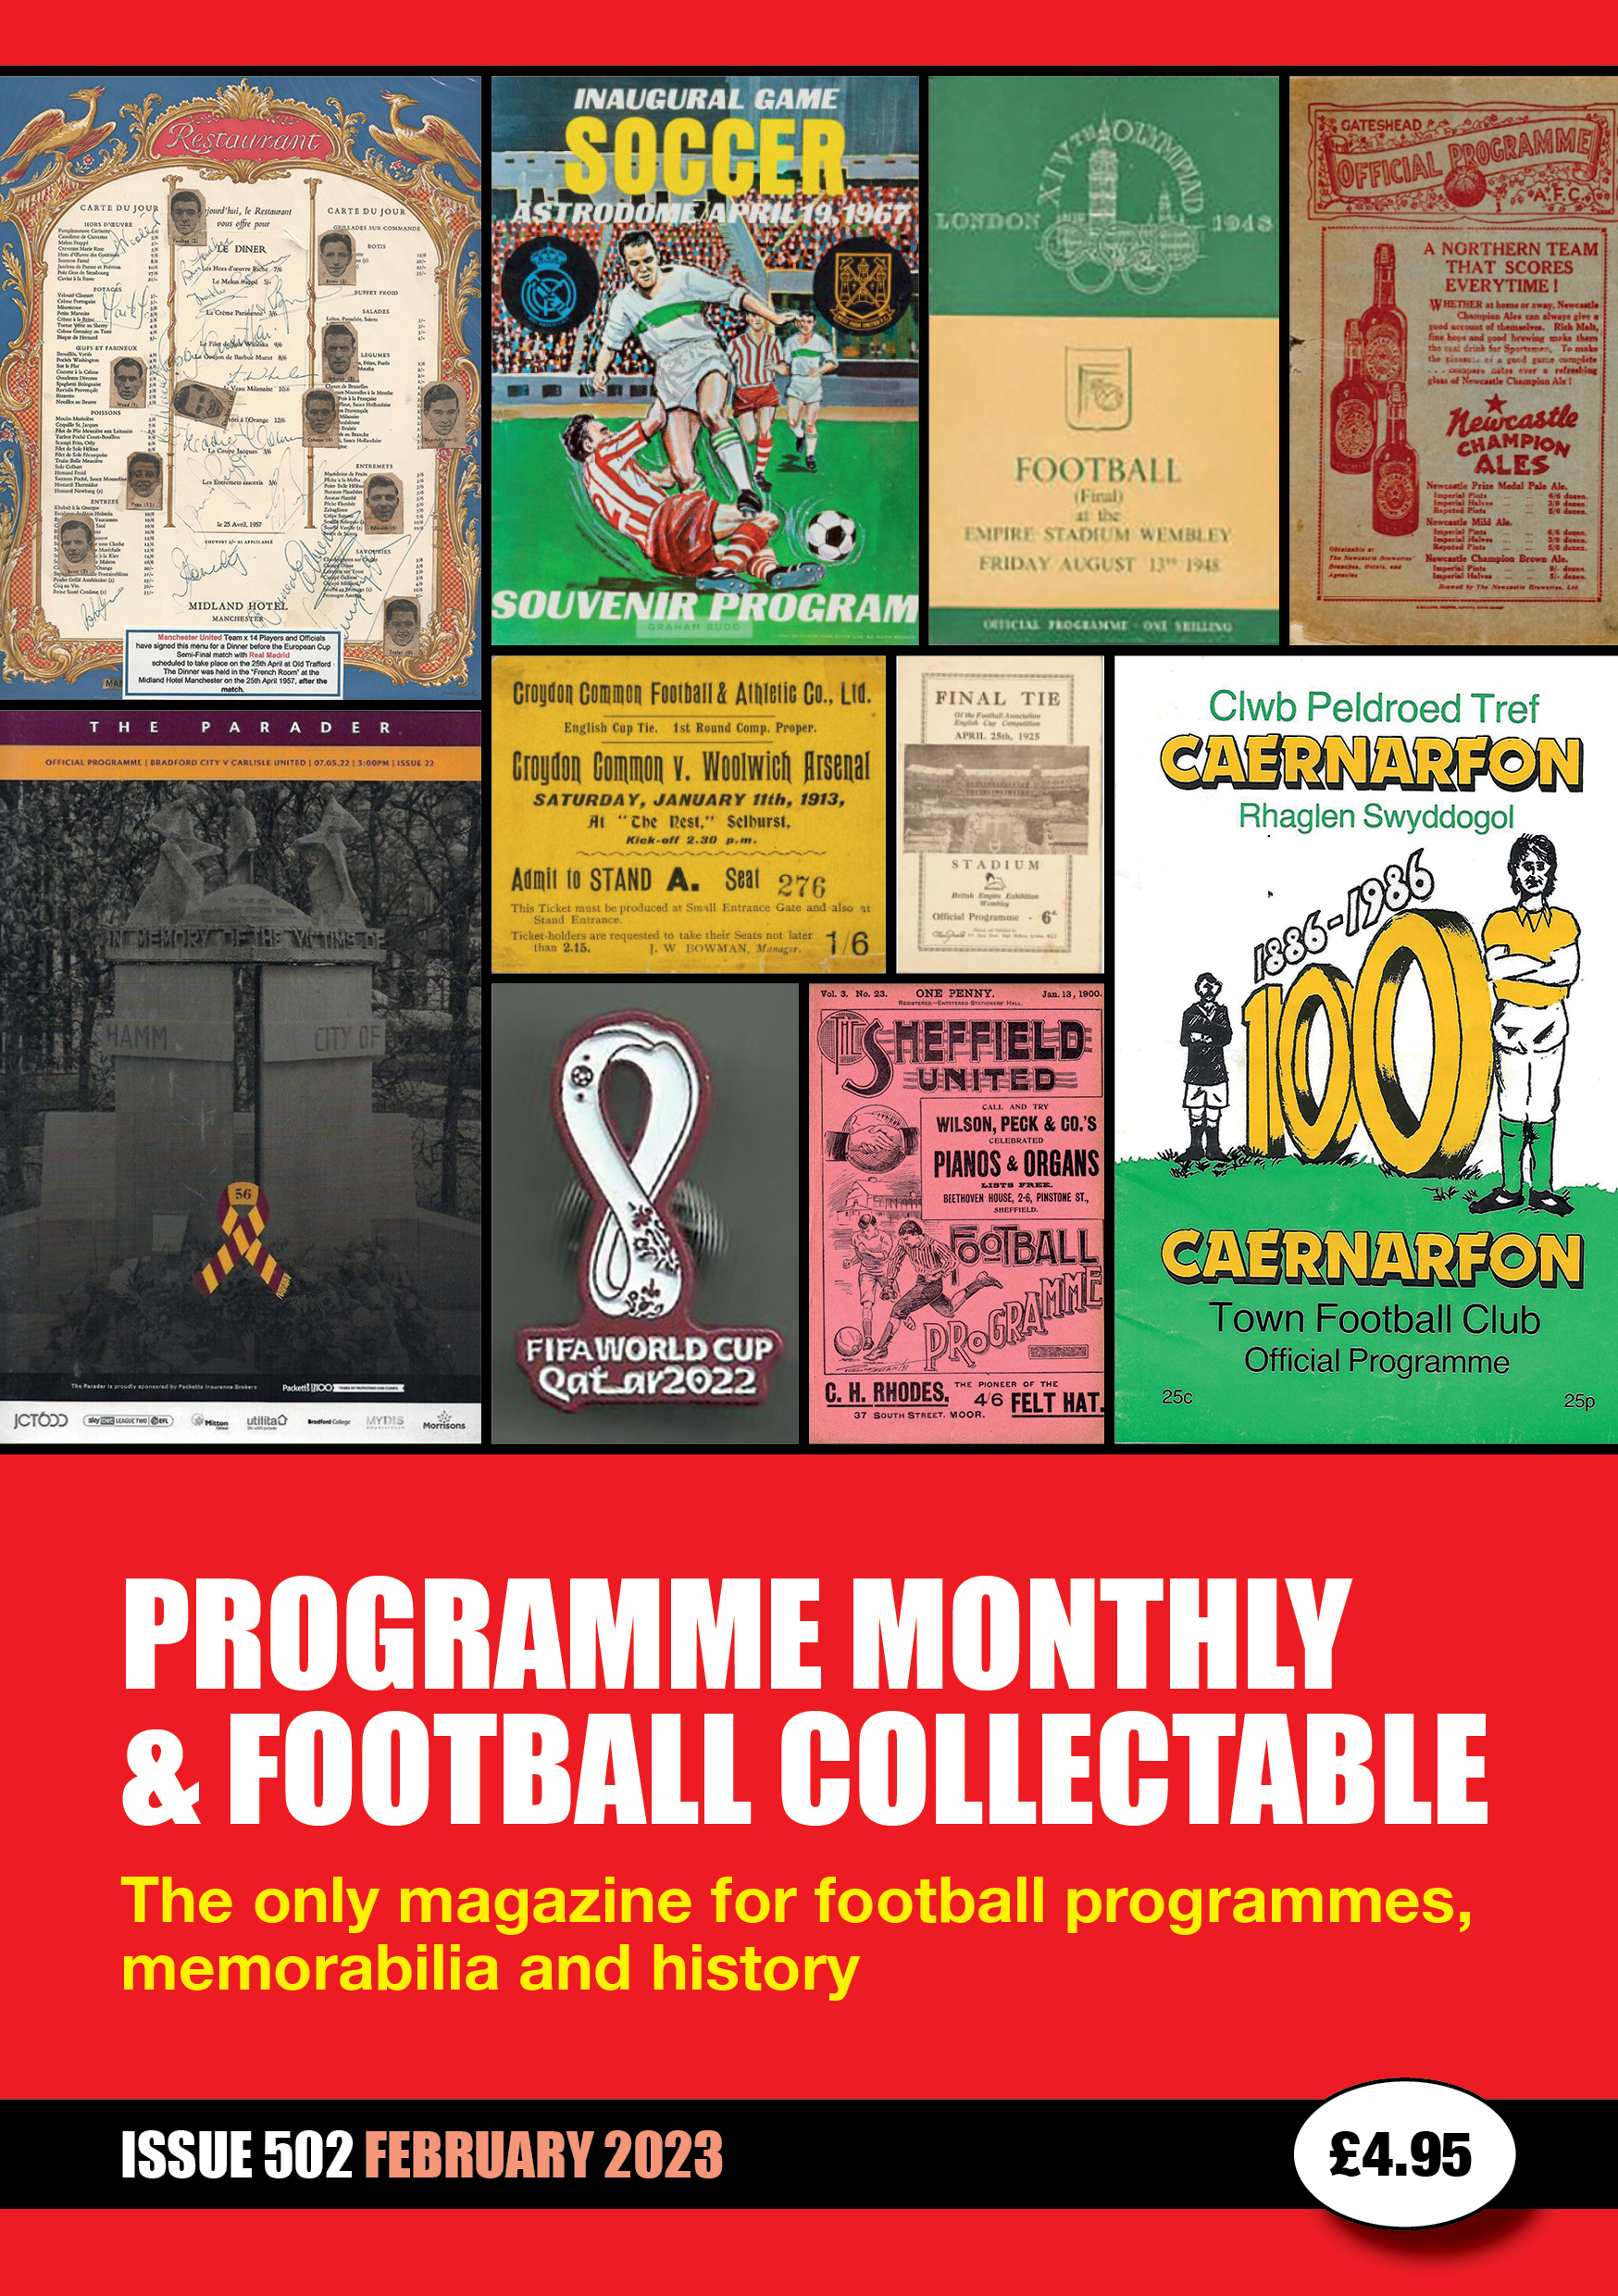 Programme Monthly - Issue 502 Ferbruary 2023